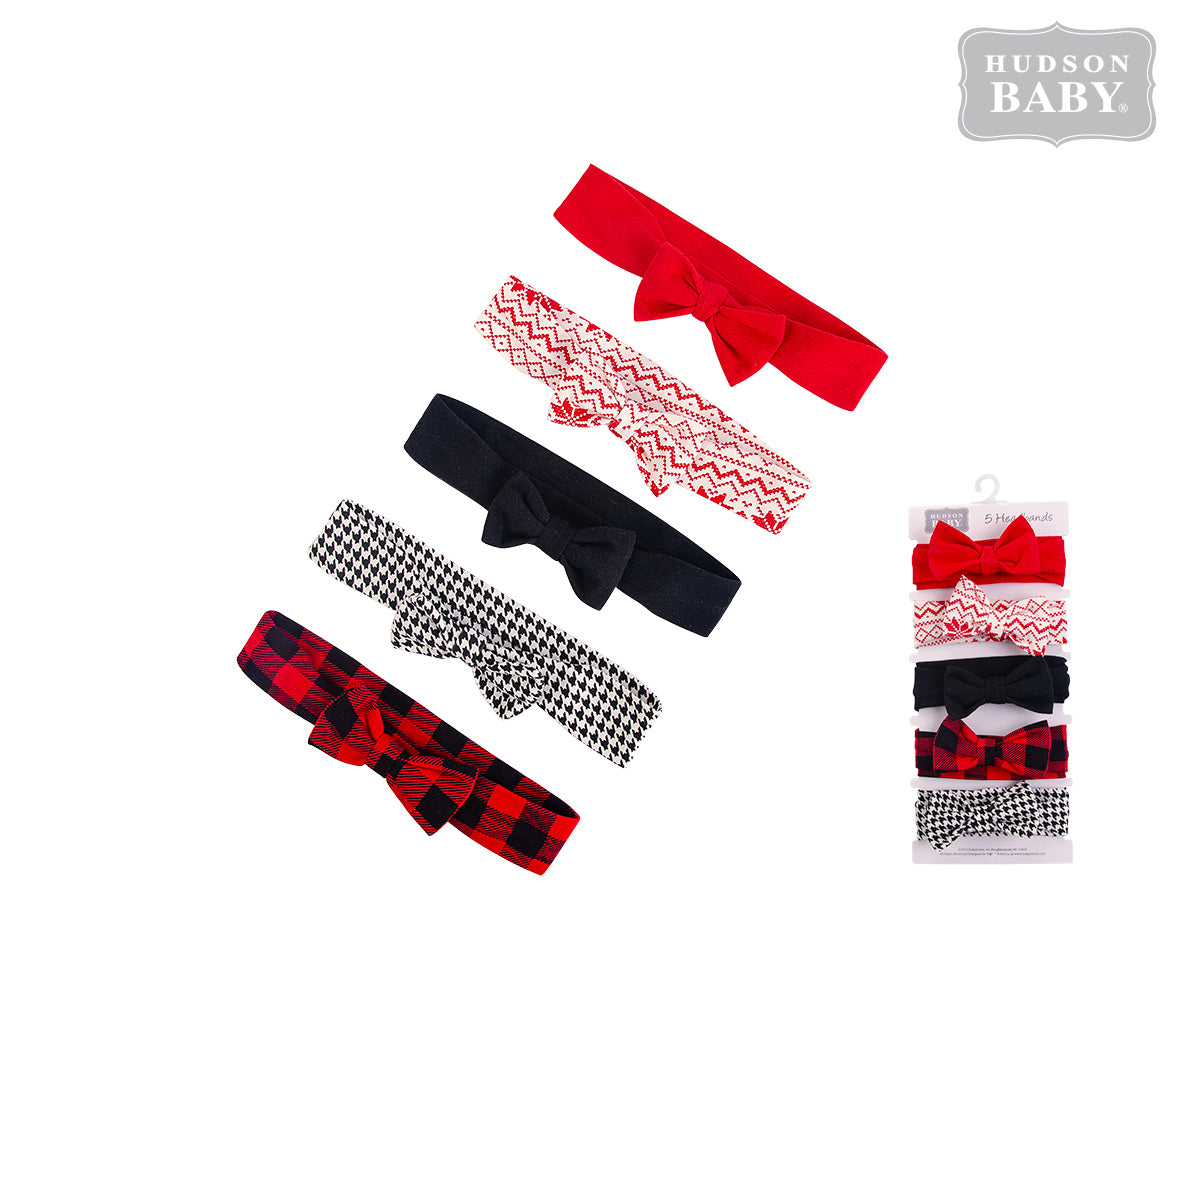 Hudson Baby Christmas Headwraps 5 Piece Pack 56544 - 1221 - Little Kooma